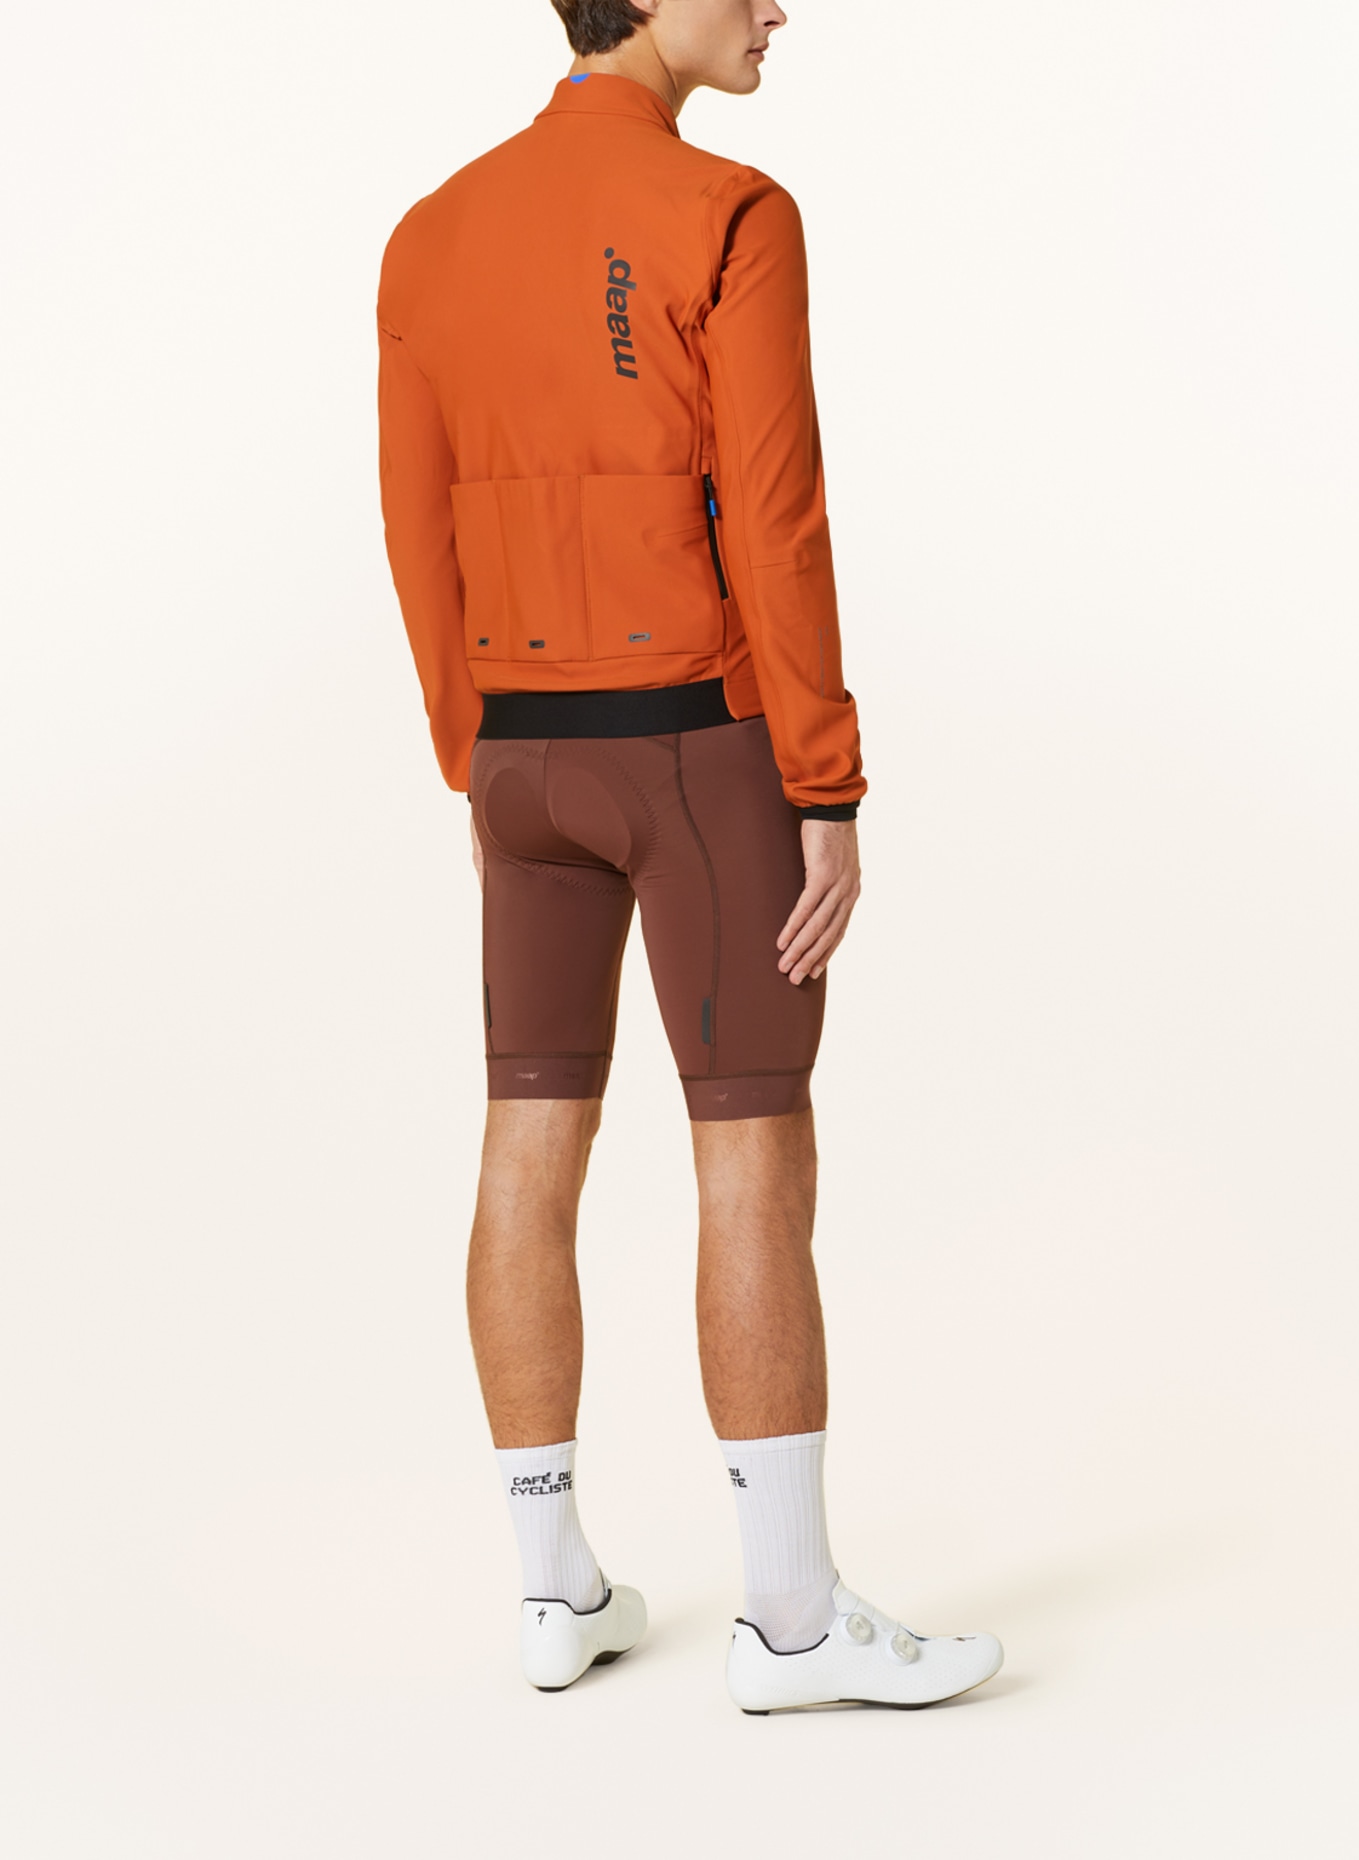 MAAP Thermal cycling jacket TRAINING WINTER, Color: ORANGE (Image 3)